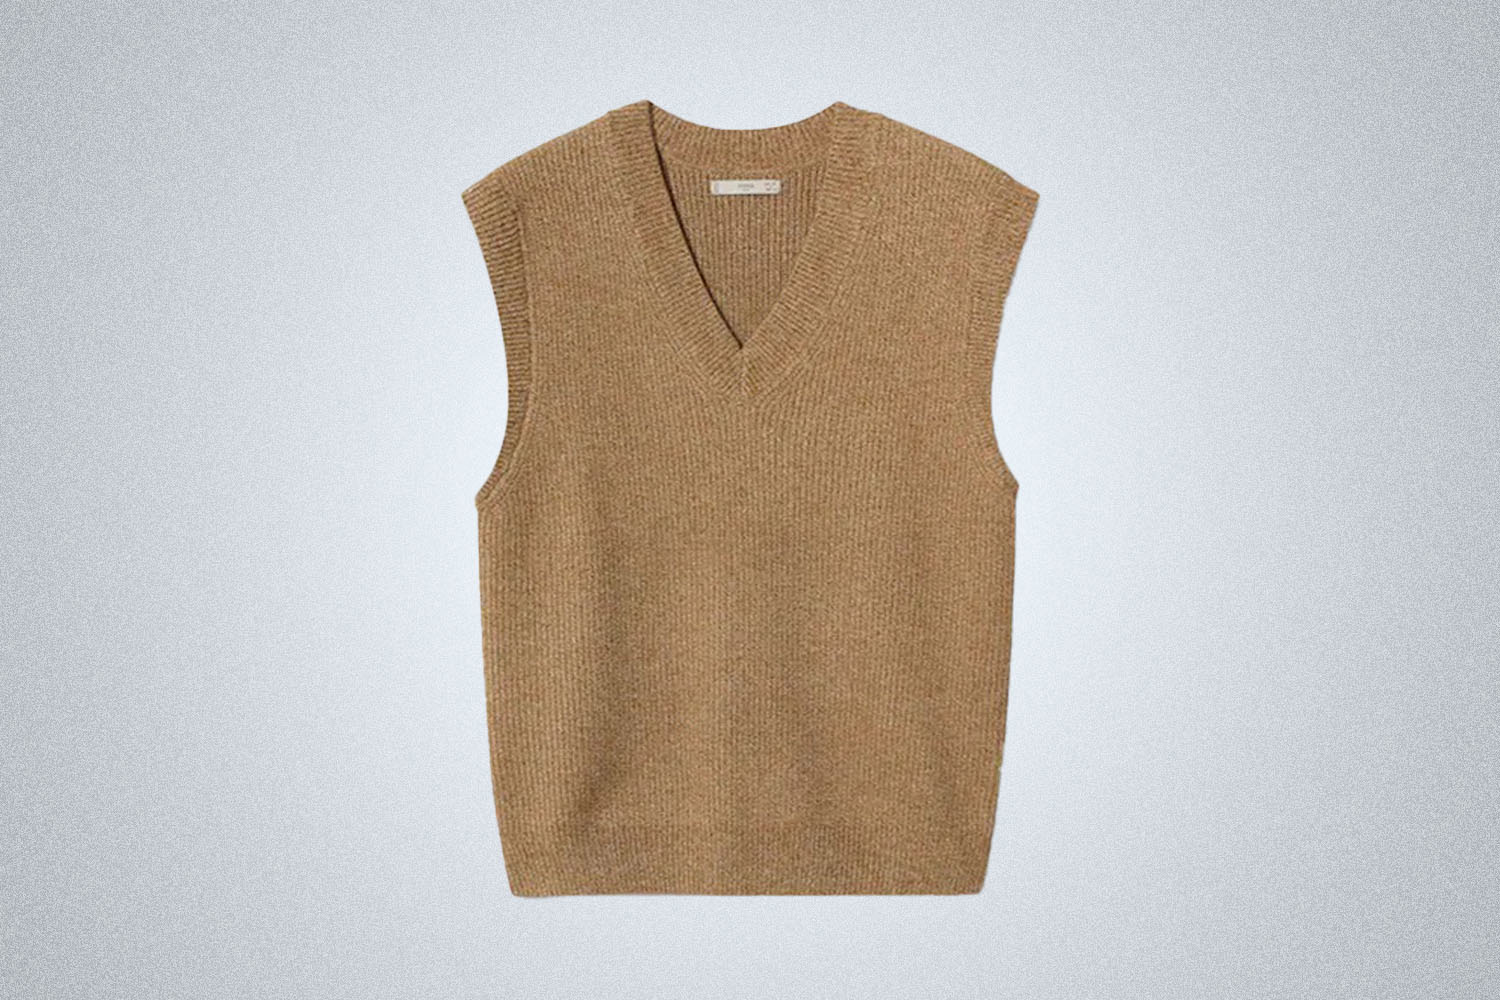 The Best Sweater Vests Are the Epitome of Cool. Here Are 10 to Consider ...